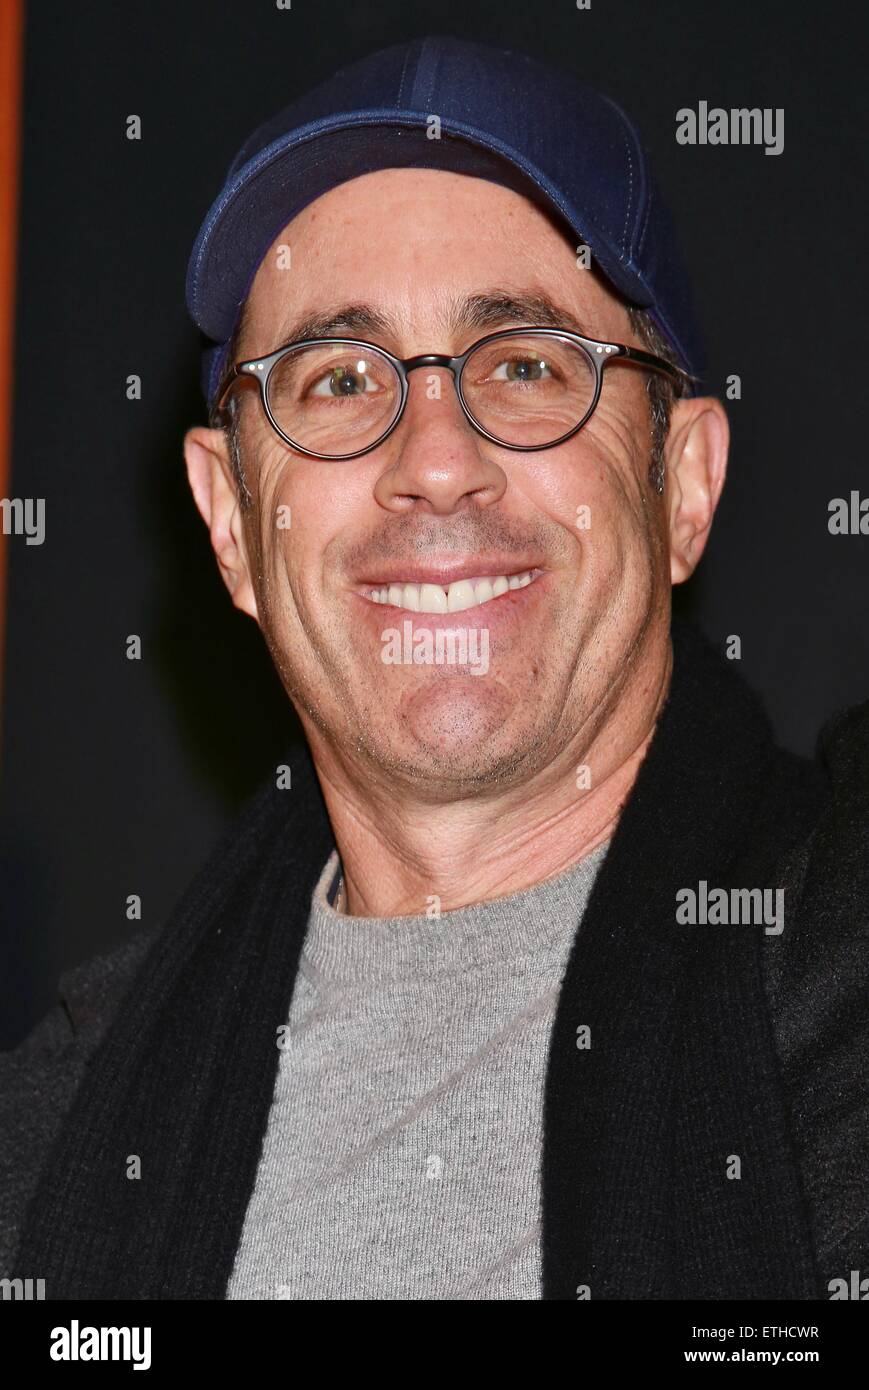 New York premiere party of 'Cop Show' at Caroline's On Broadway Comedy Club - Arrivals  Featuring: Jerry Seinfeld Where: New York, New York, United States When: 24 Feb 2015 Credit: Joseph Marzullo/WENN.com Stock Photo